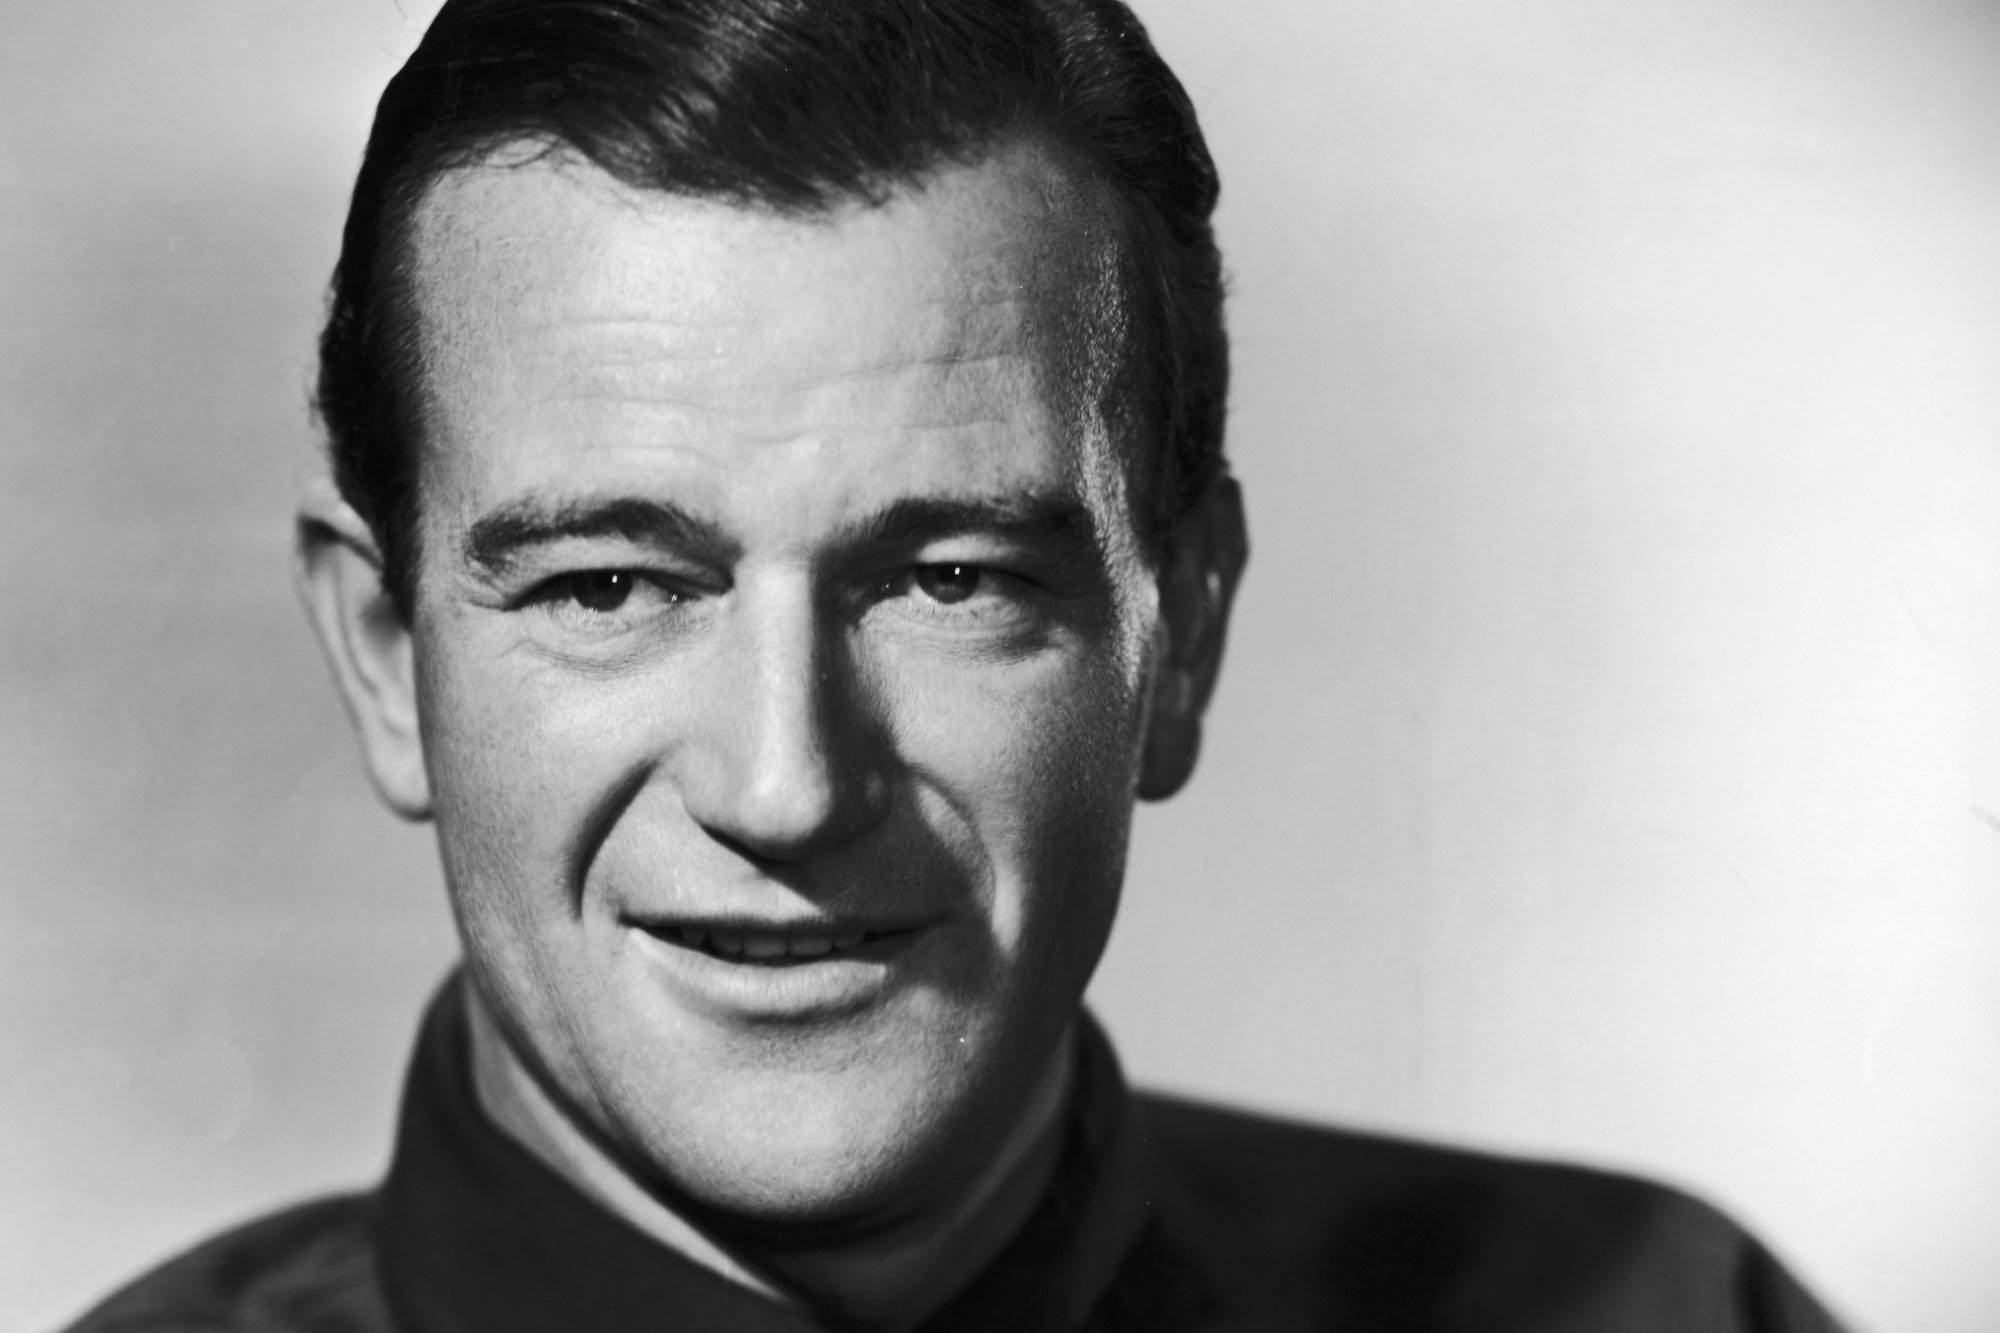 Movie star John Wayne in a black-and-white portrait with a smile on his face